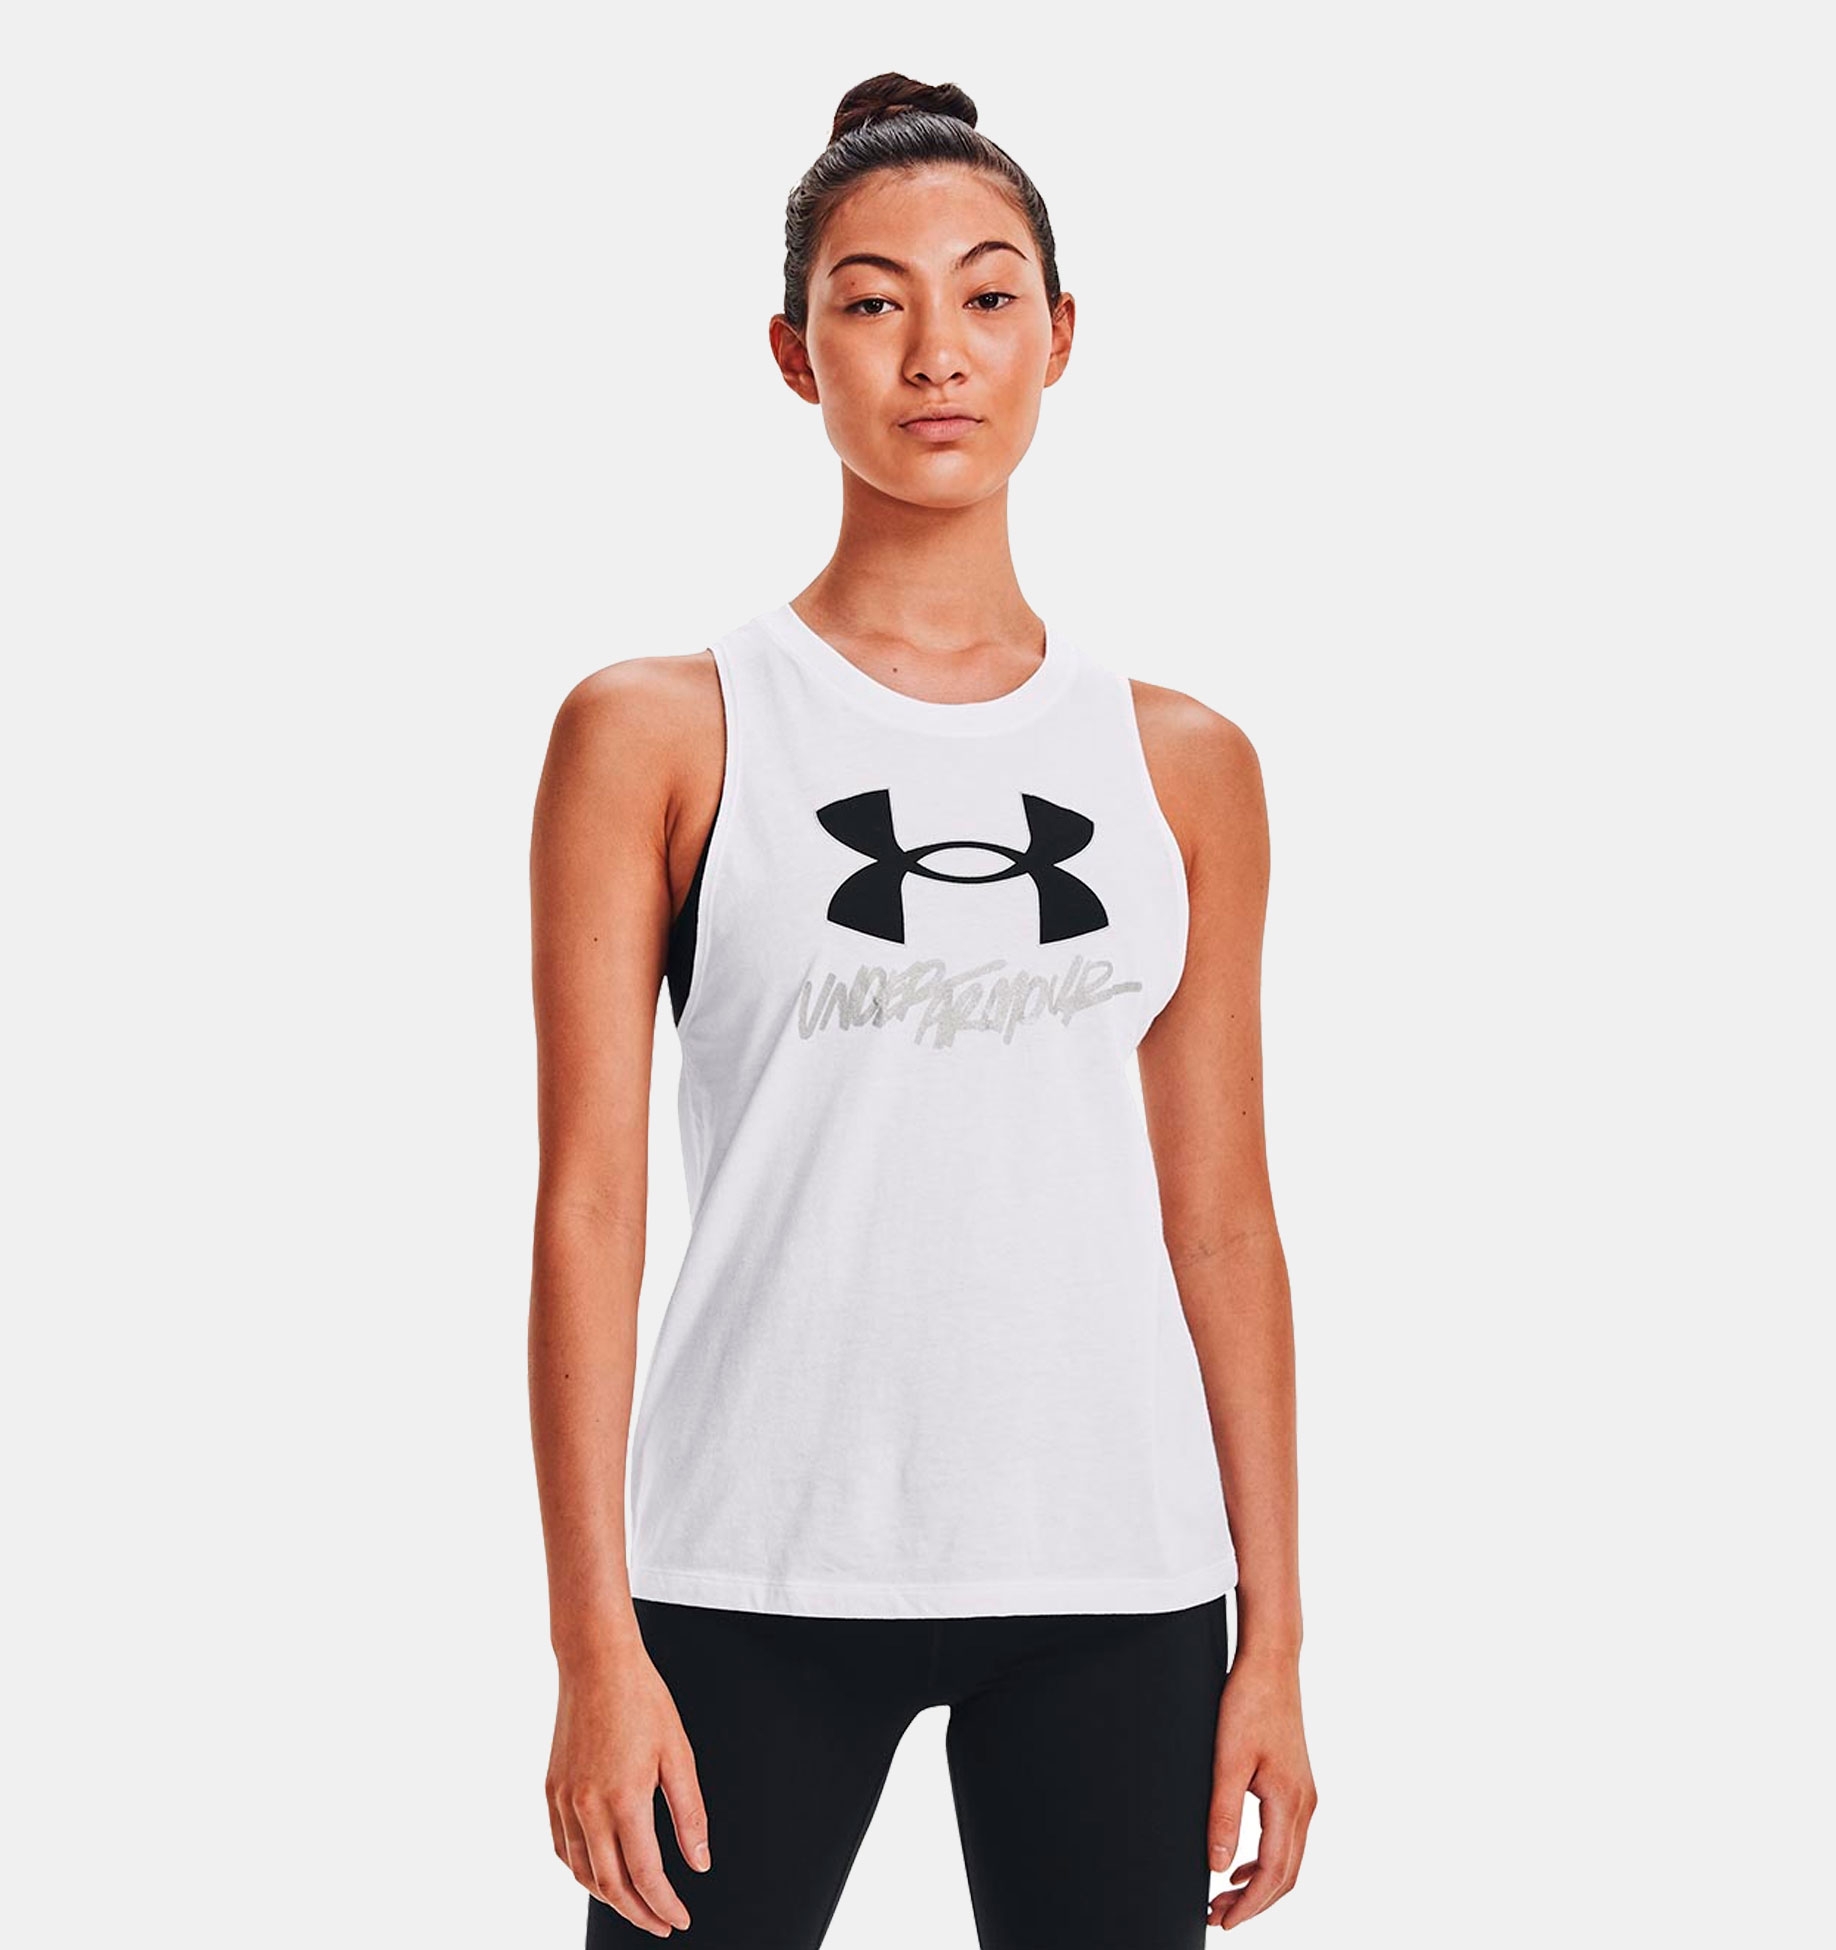 https://www.underarmour.com.ar/on/demandware.static/-/Sites-underarmour_staging/default/dw1769abe9/new_images/1371515/195252511982/195252511982-1.jpeg